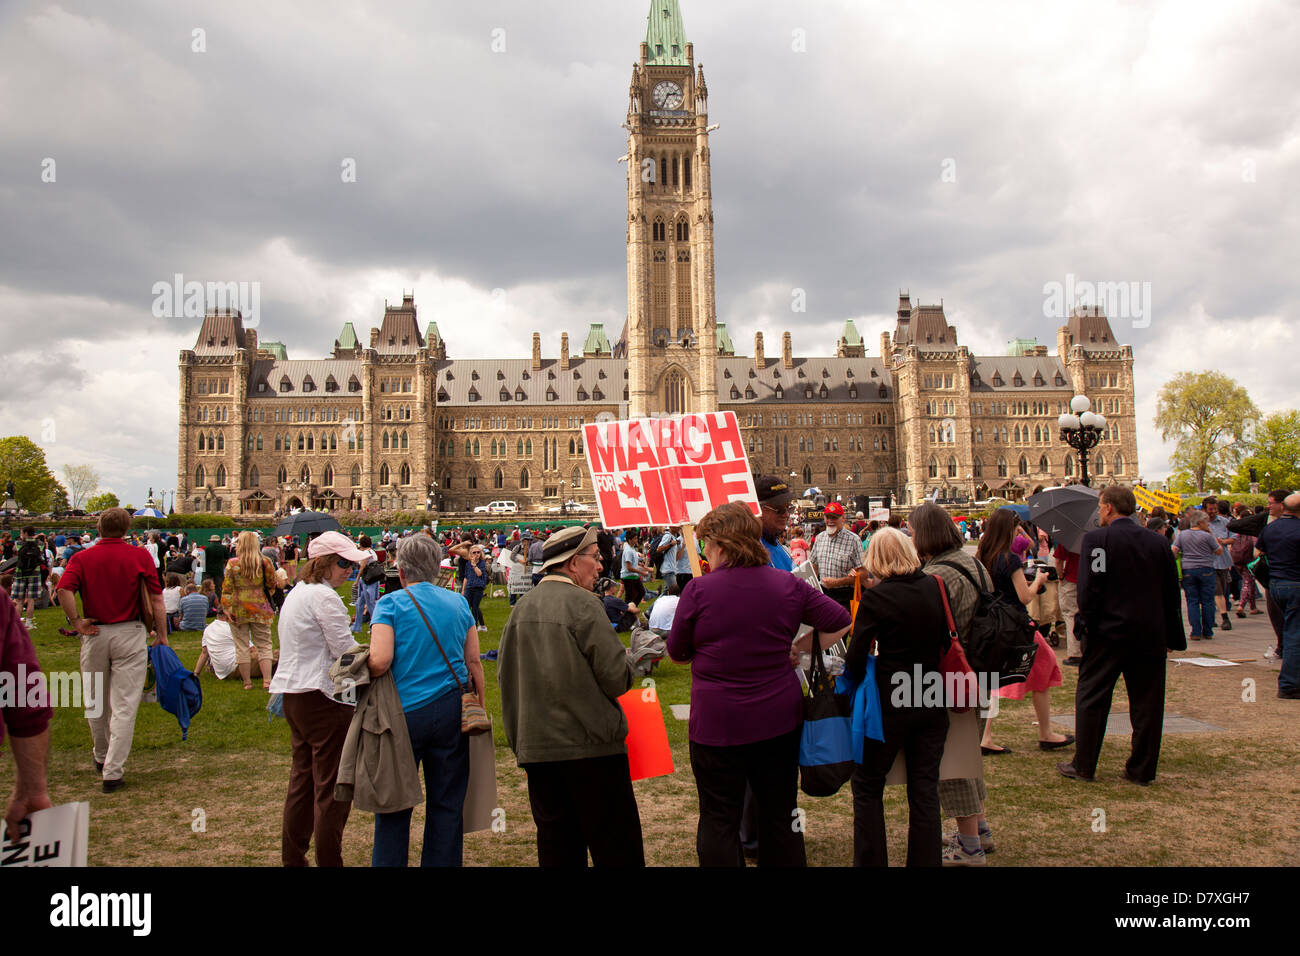 March for life demonstration at Parlaiment buildings in Ottawa, Canada Stock Photo